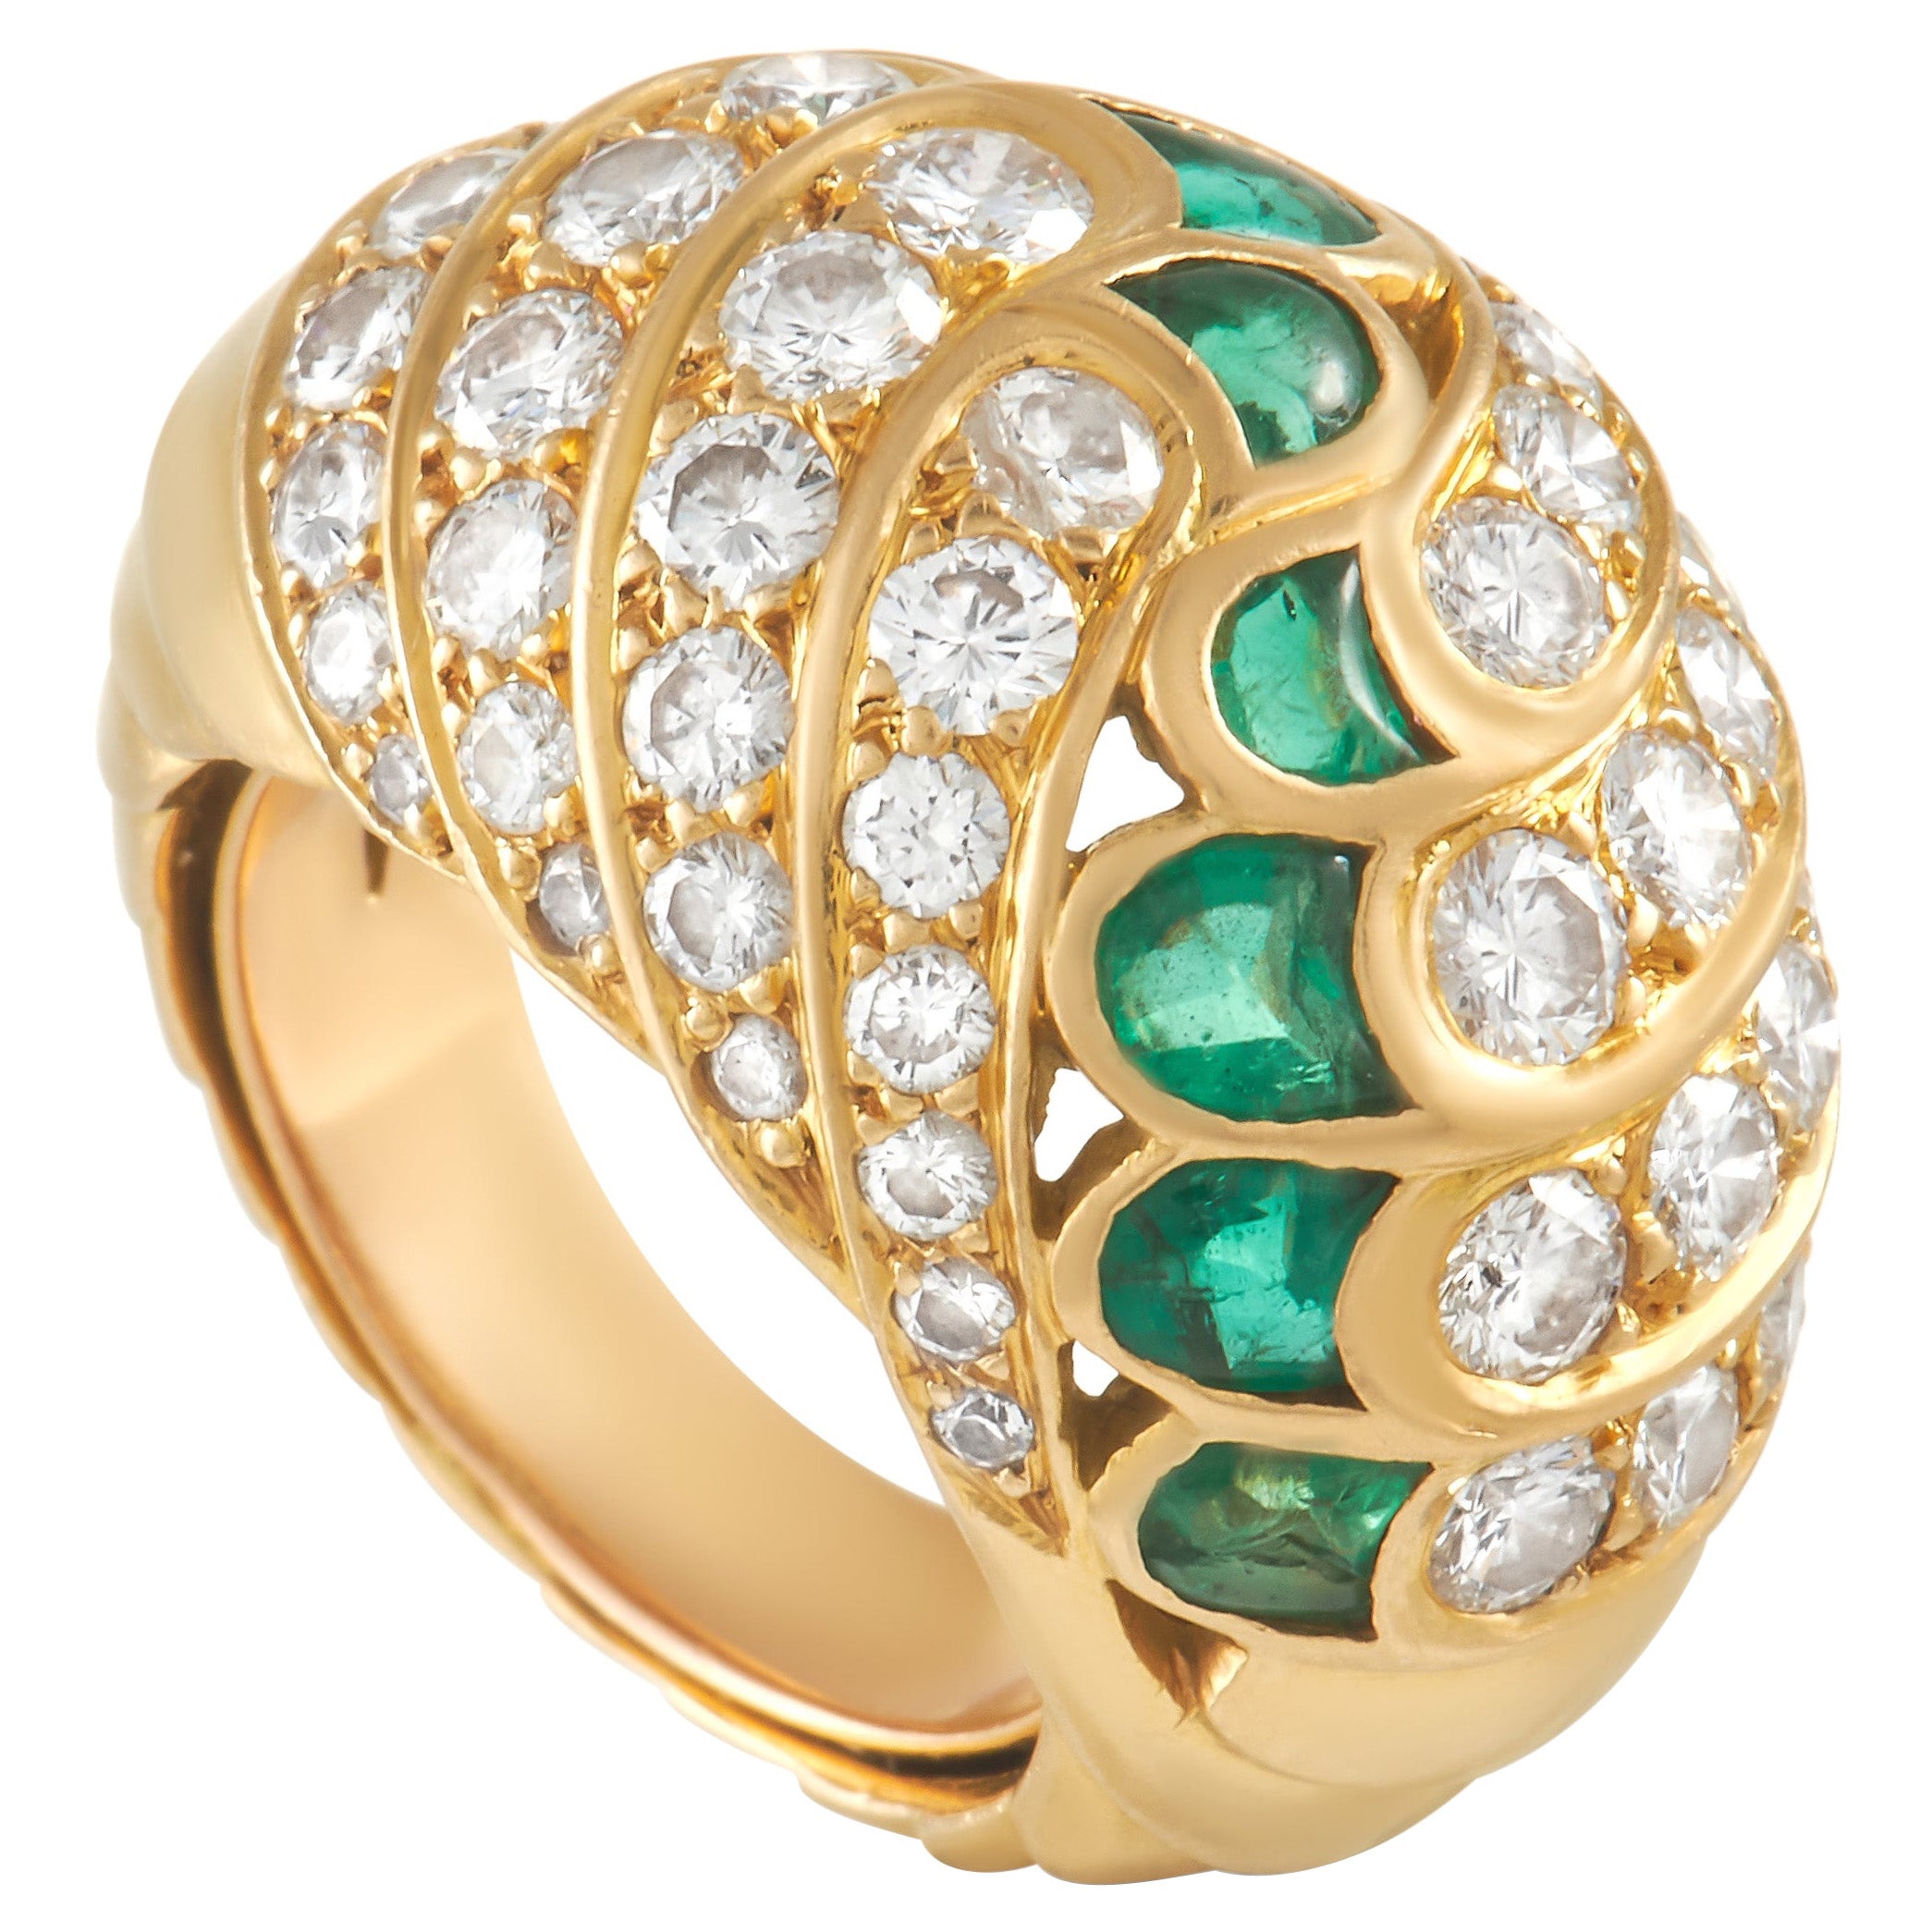 Piaget 18K Yellow Gold 2.25 Ct Diamond and Emerald Ring